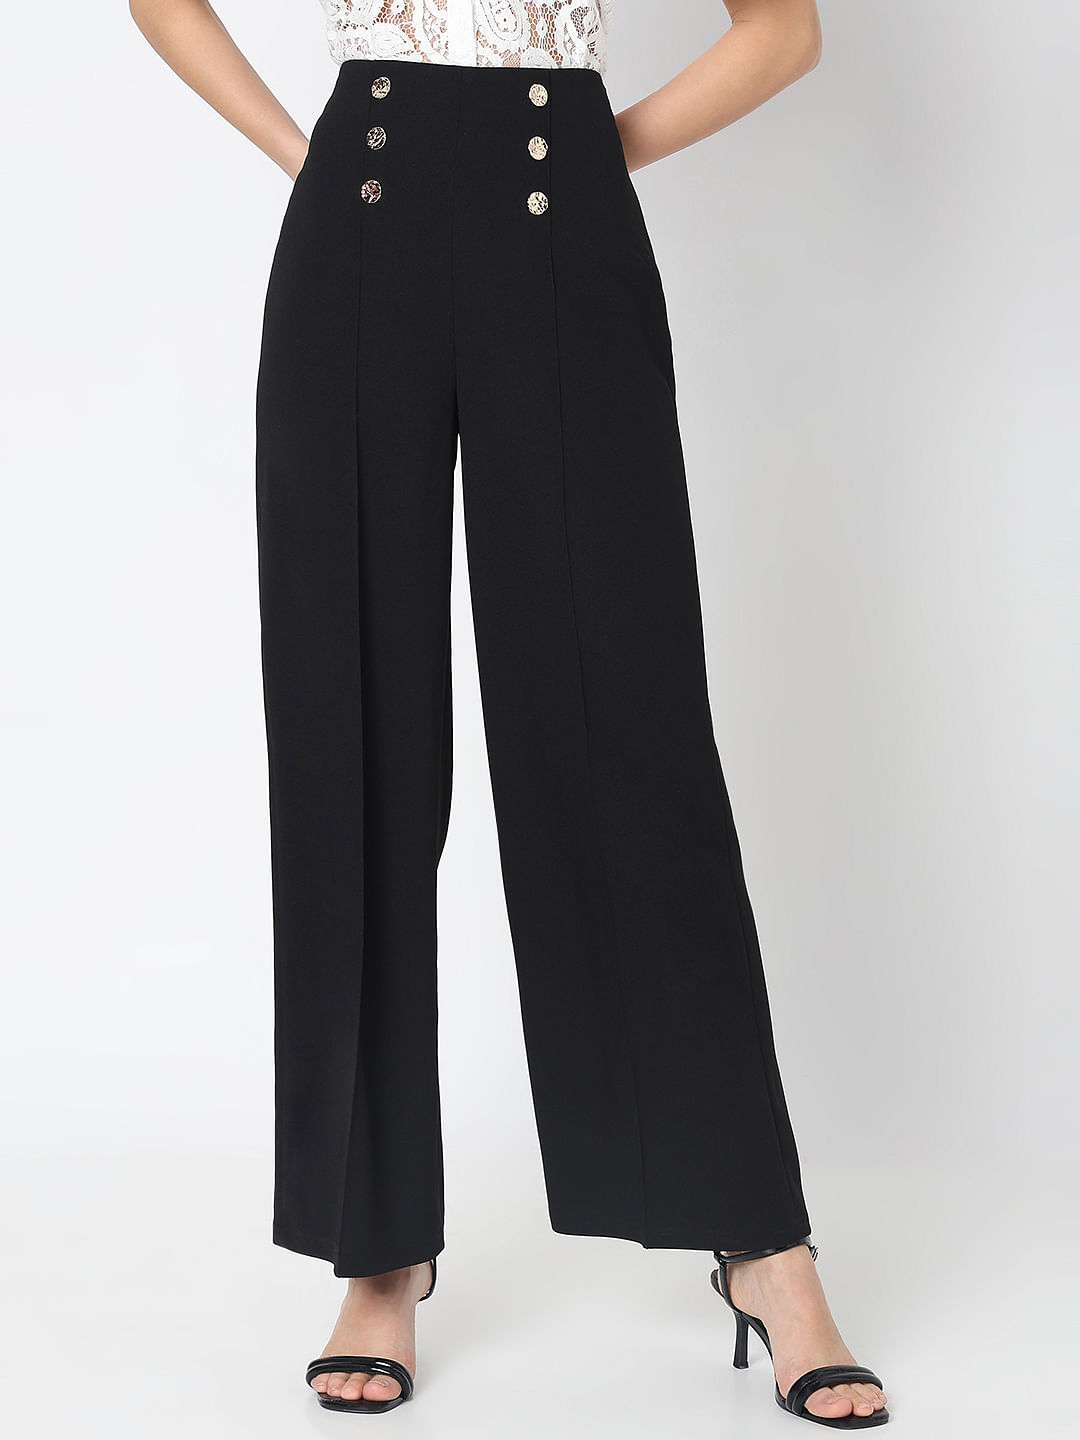 Trousers Elastic Pencil Pants High Waist Pants Women Plus Size High Waisted  Trousers Skinny Pants at Rs 2245 | High Waisted Pant | ID: 2850863855048